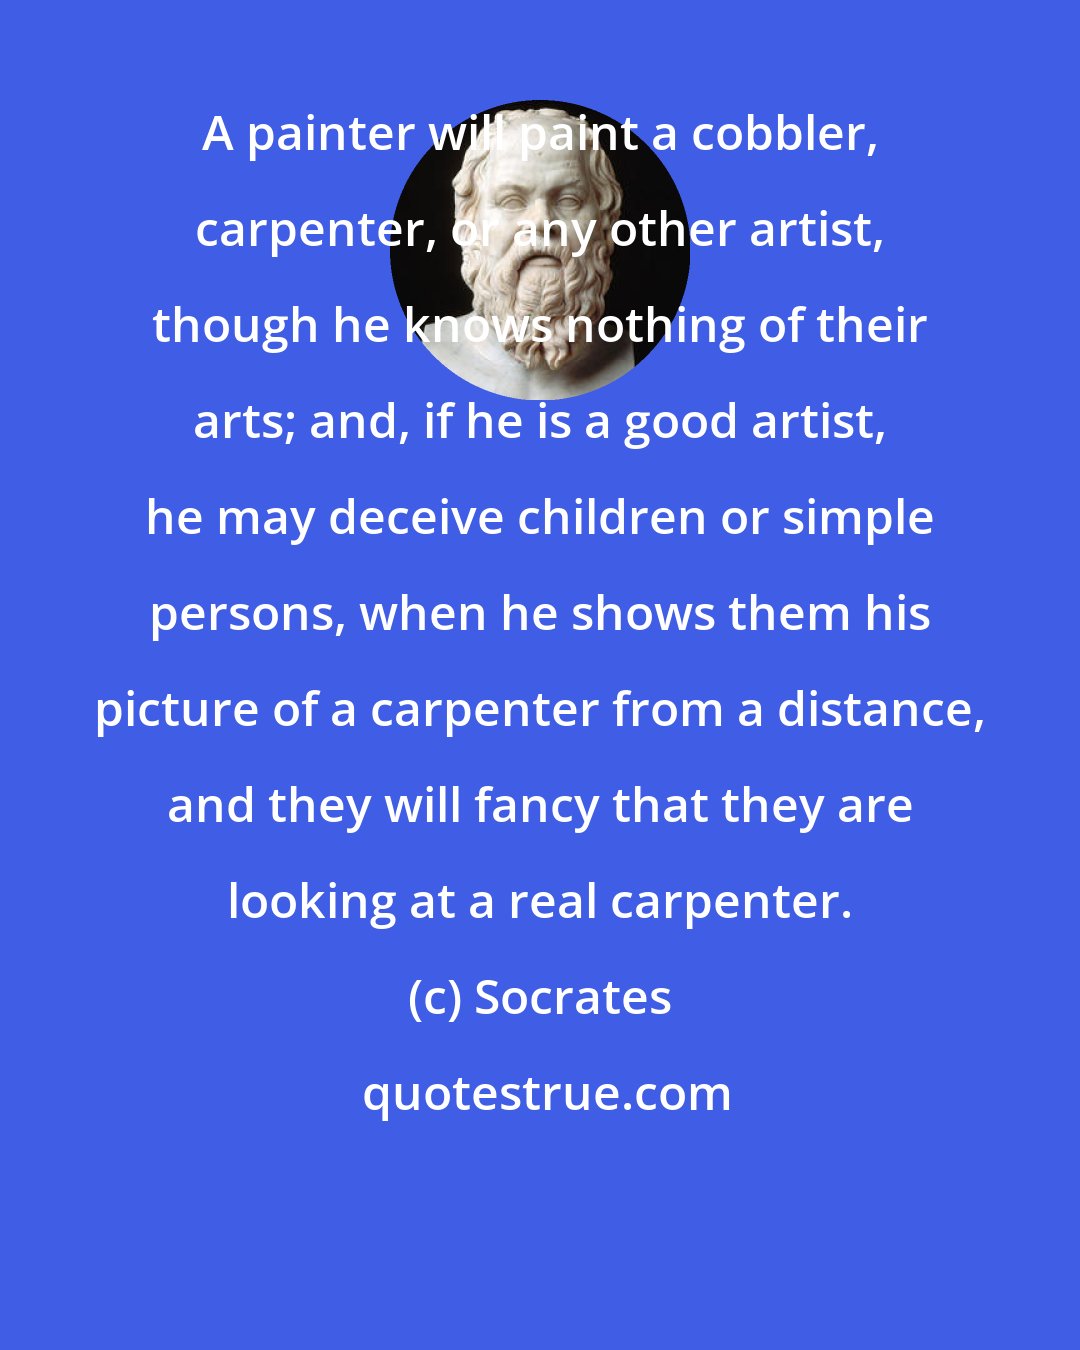 Socrates: A painter will paint a cobbler, carpenter, or any other artist, though he knows nothing of their arts; and, if he is a good artist, he may deceive children or simple persons, when he shows them his picture of a carpenter from a distance, and they will fancy that they are looking at a real carpenter.